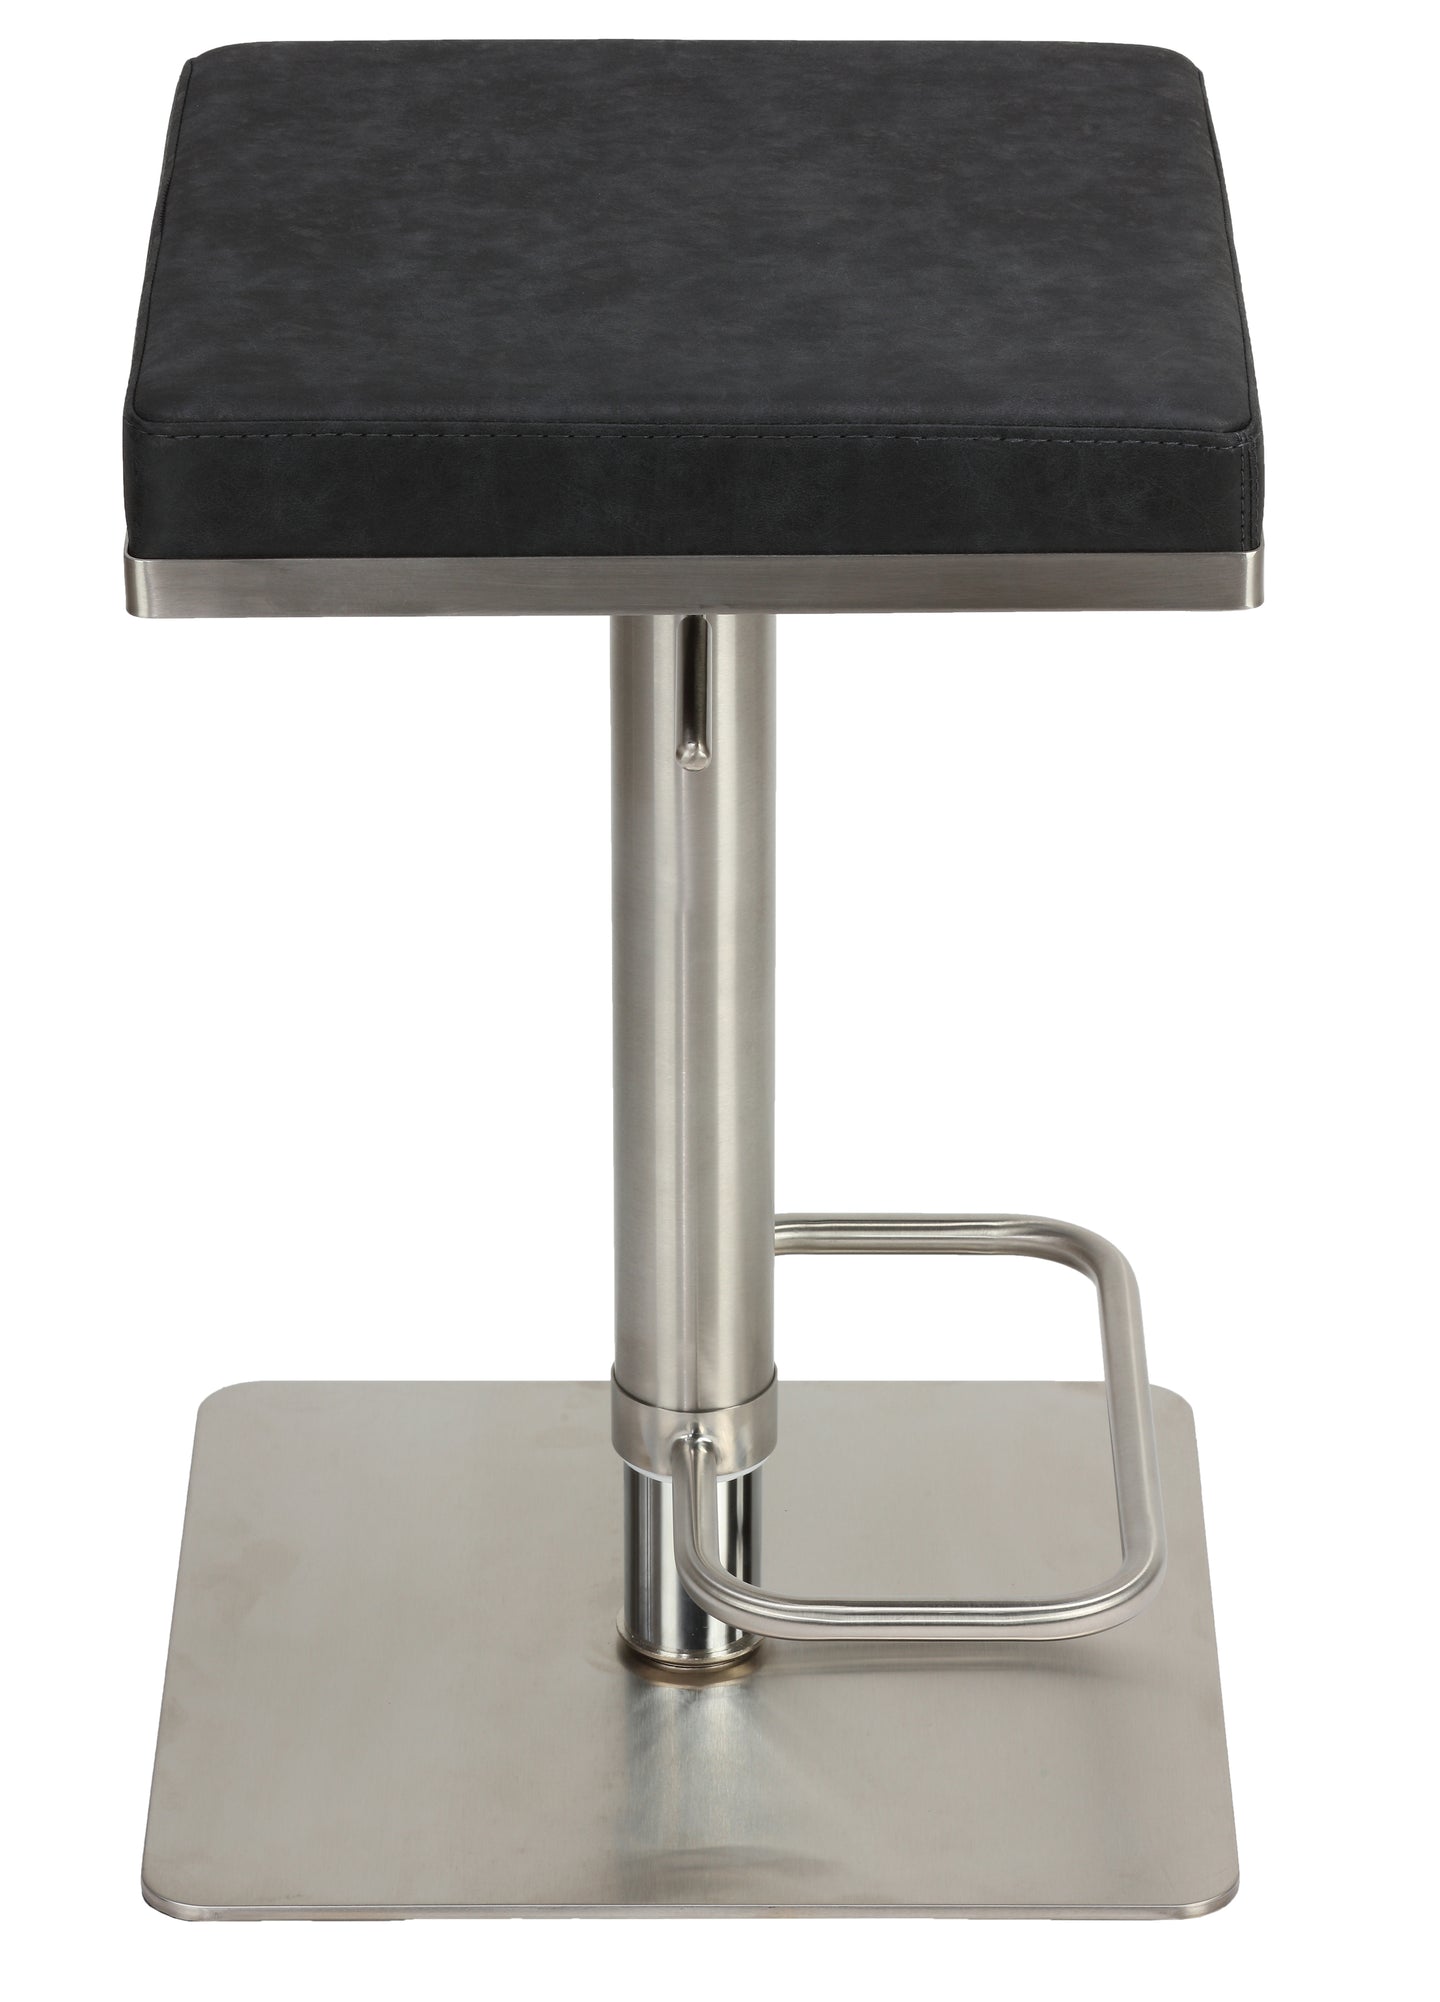 Cortesi Home Atlas Adjustable Barstool in Brushed Stainless Steel with Heavy Solid Base, Retro Black